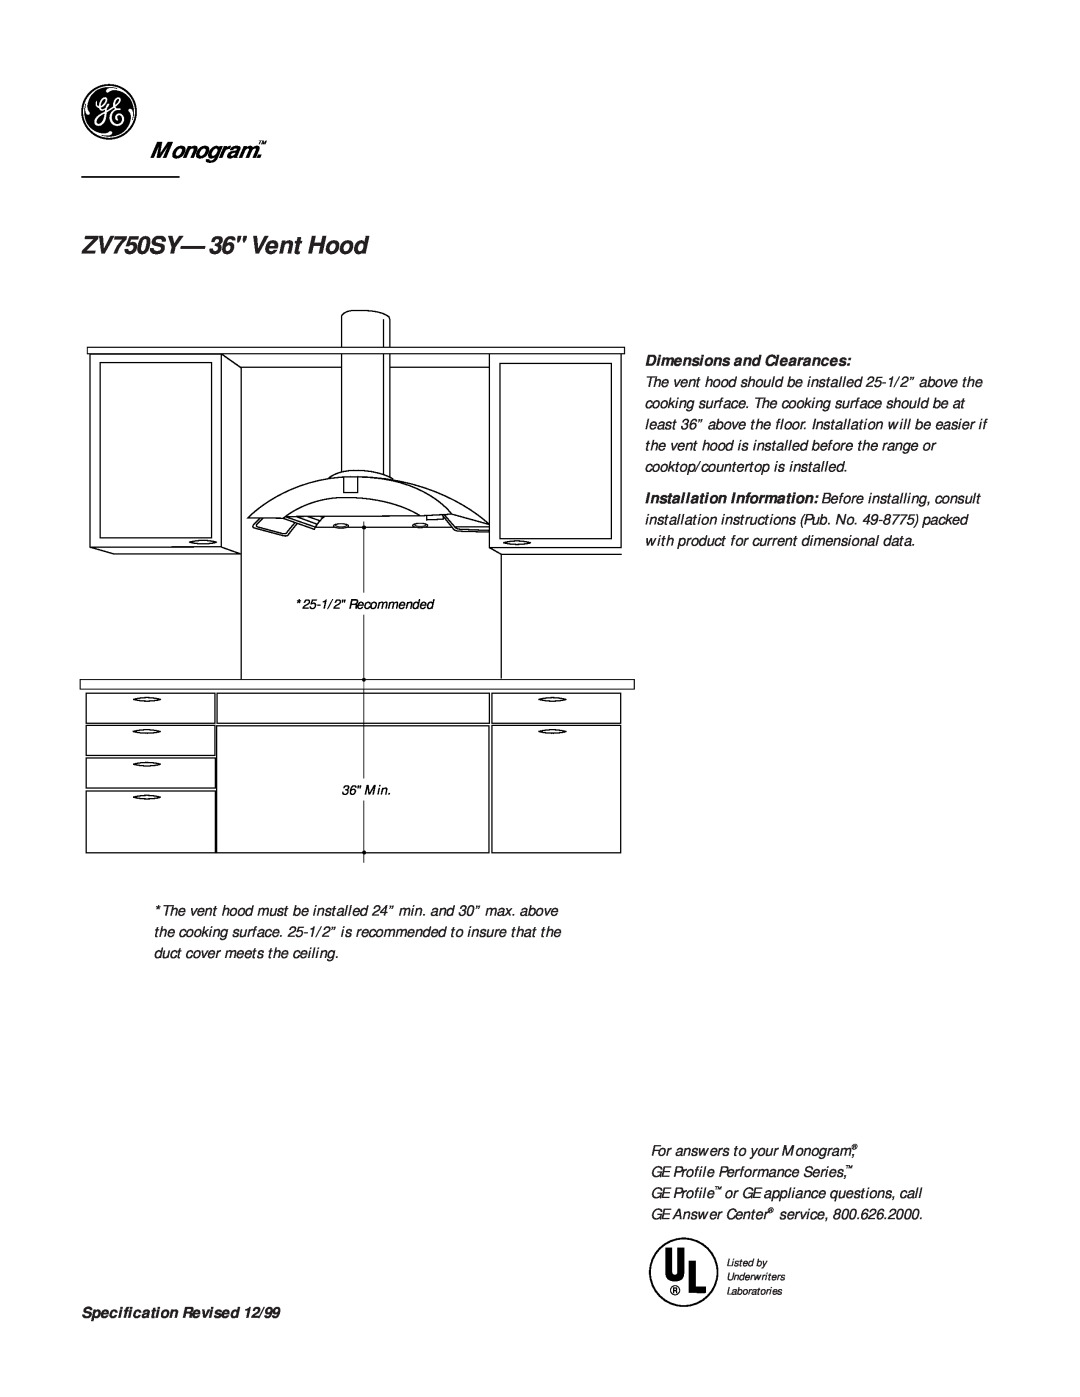 GE Monogram dimensions Dimensions and Clearances, ZV750SY-36 Vent Hood, Monogram, Specification Revised 12/99 